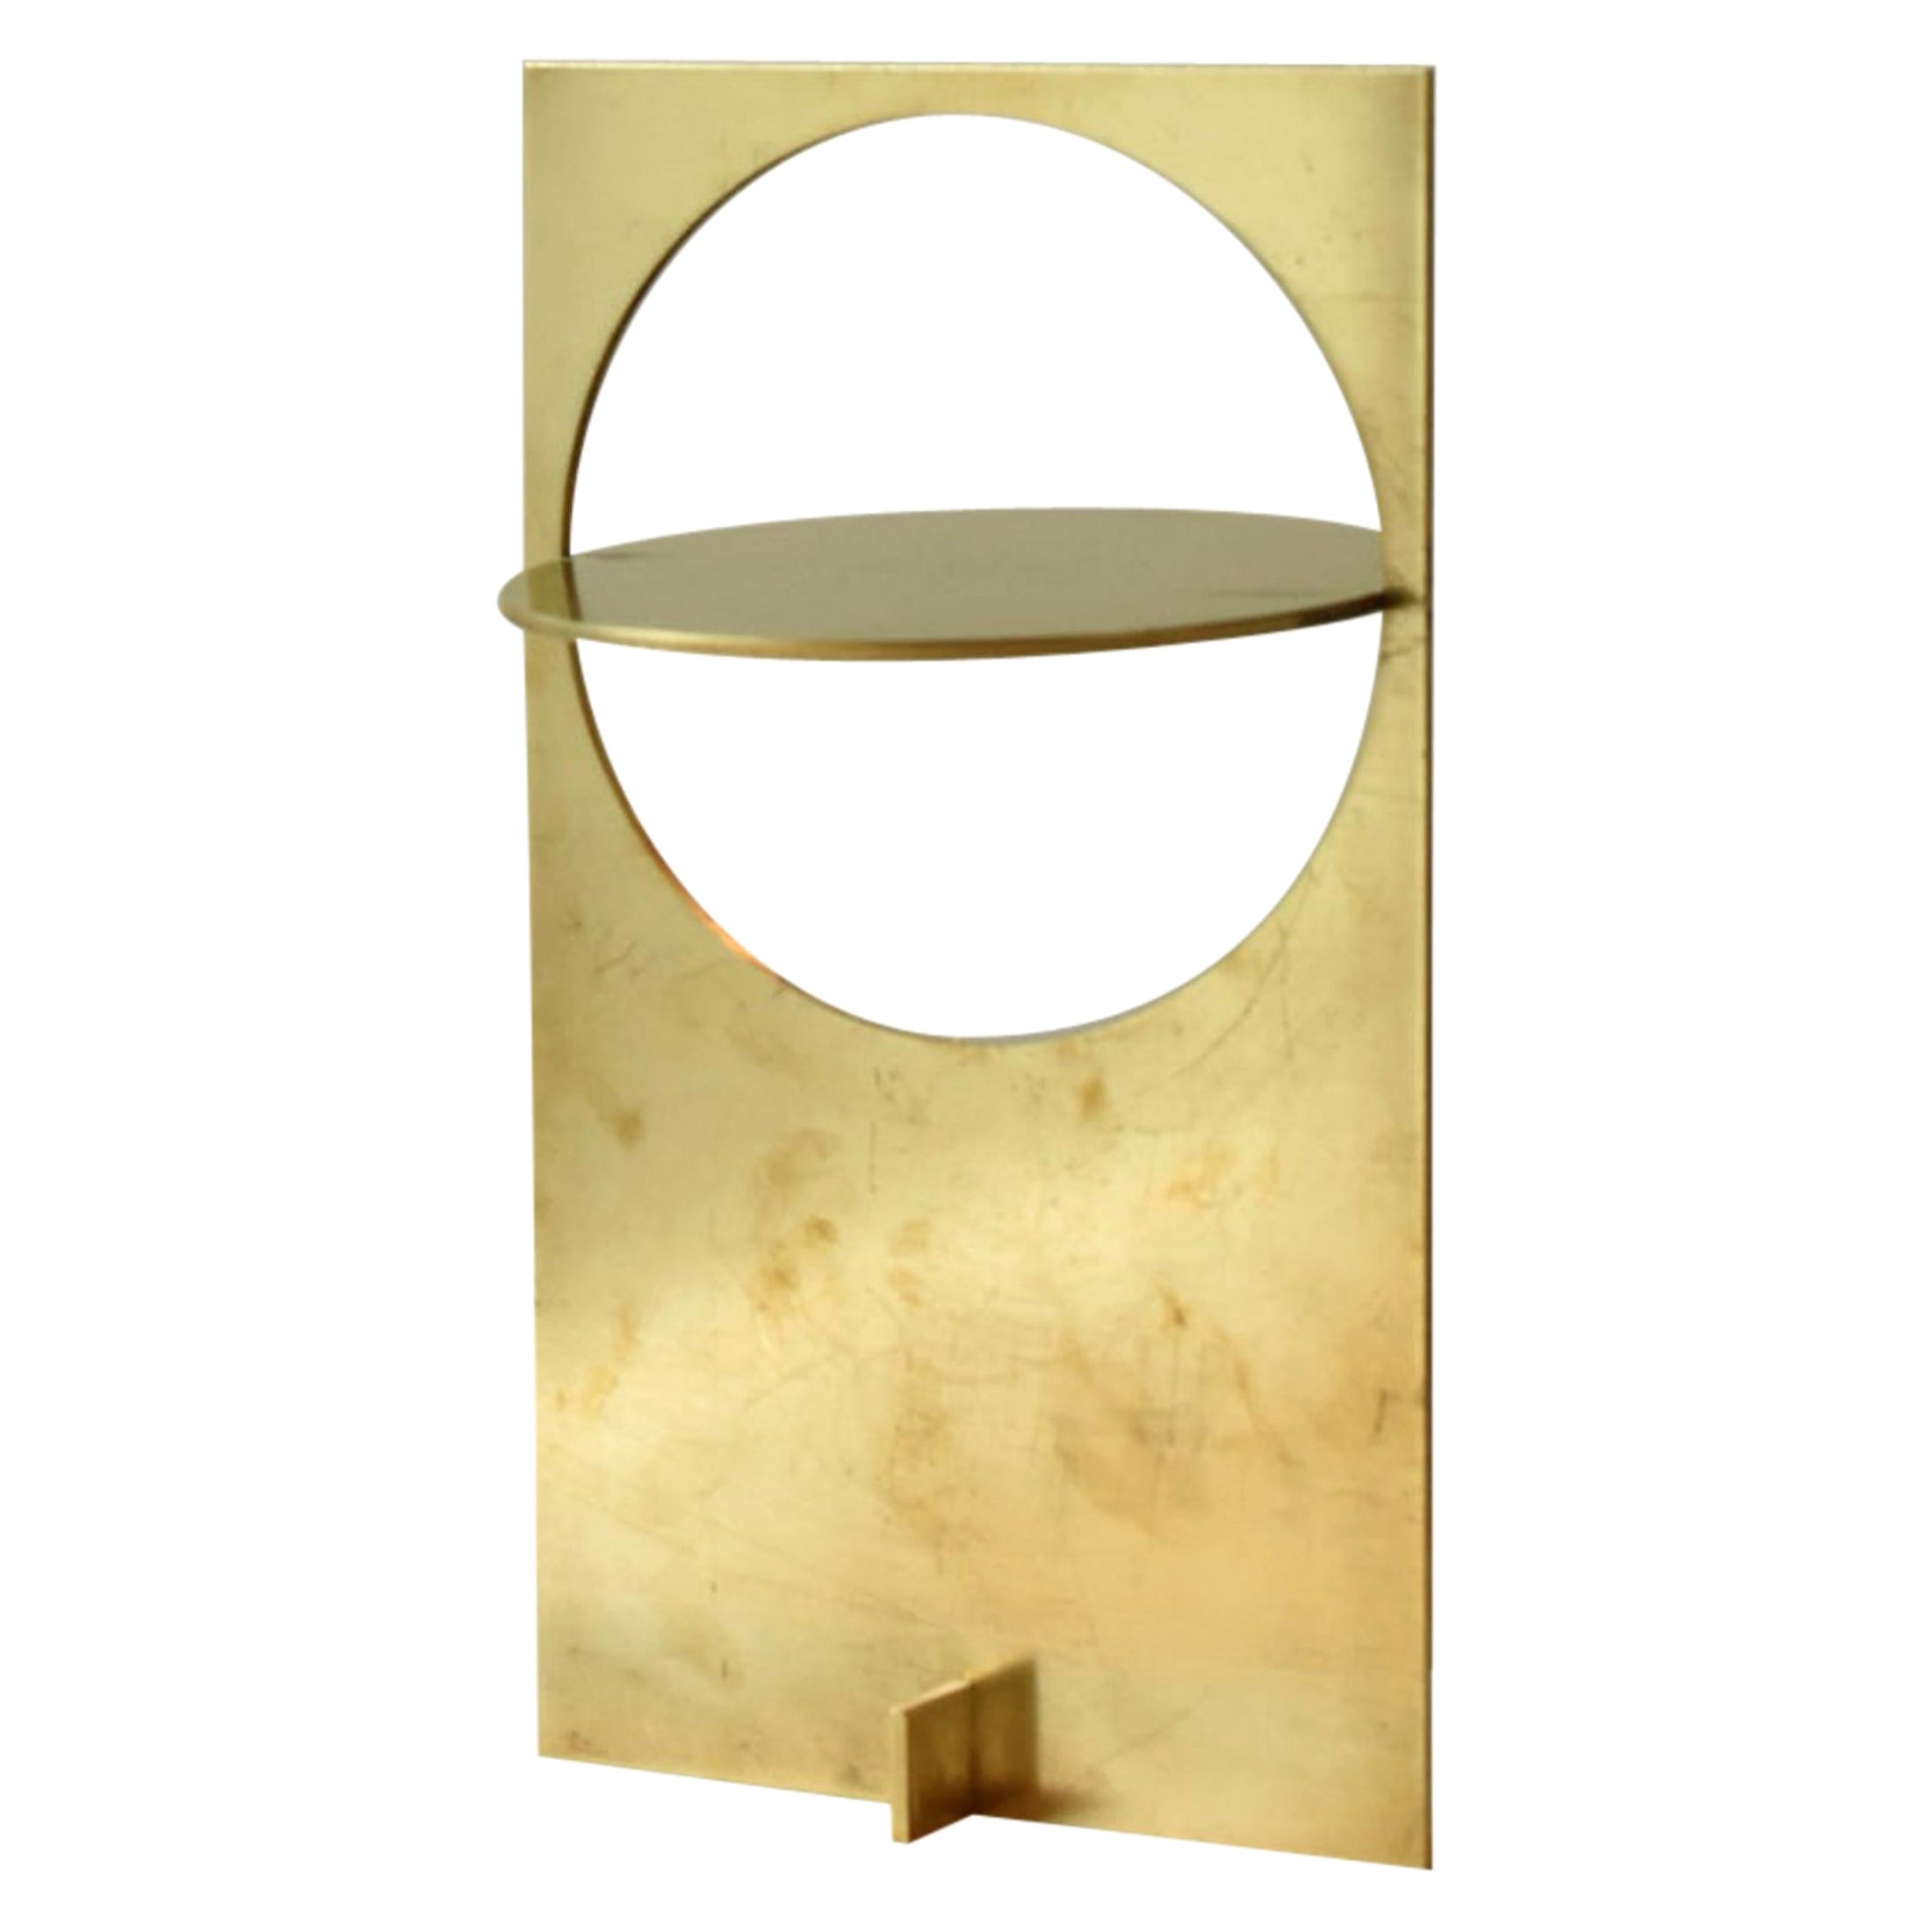 OBJ-01 Brass Table Lamp by Manu Bano For Sale